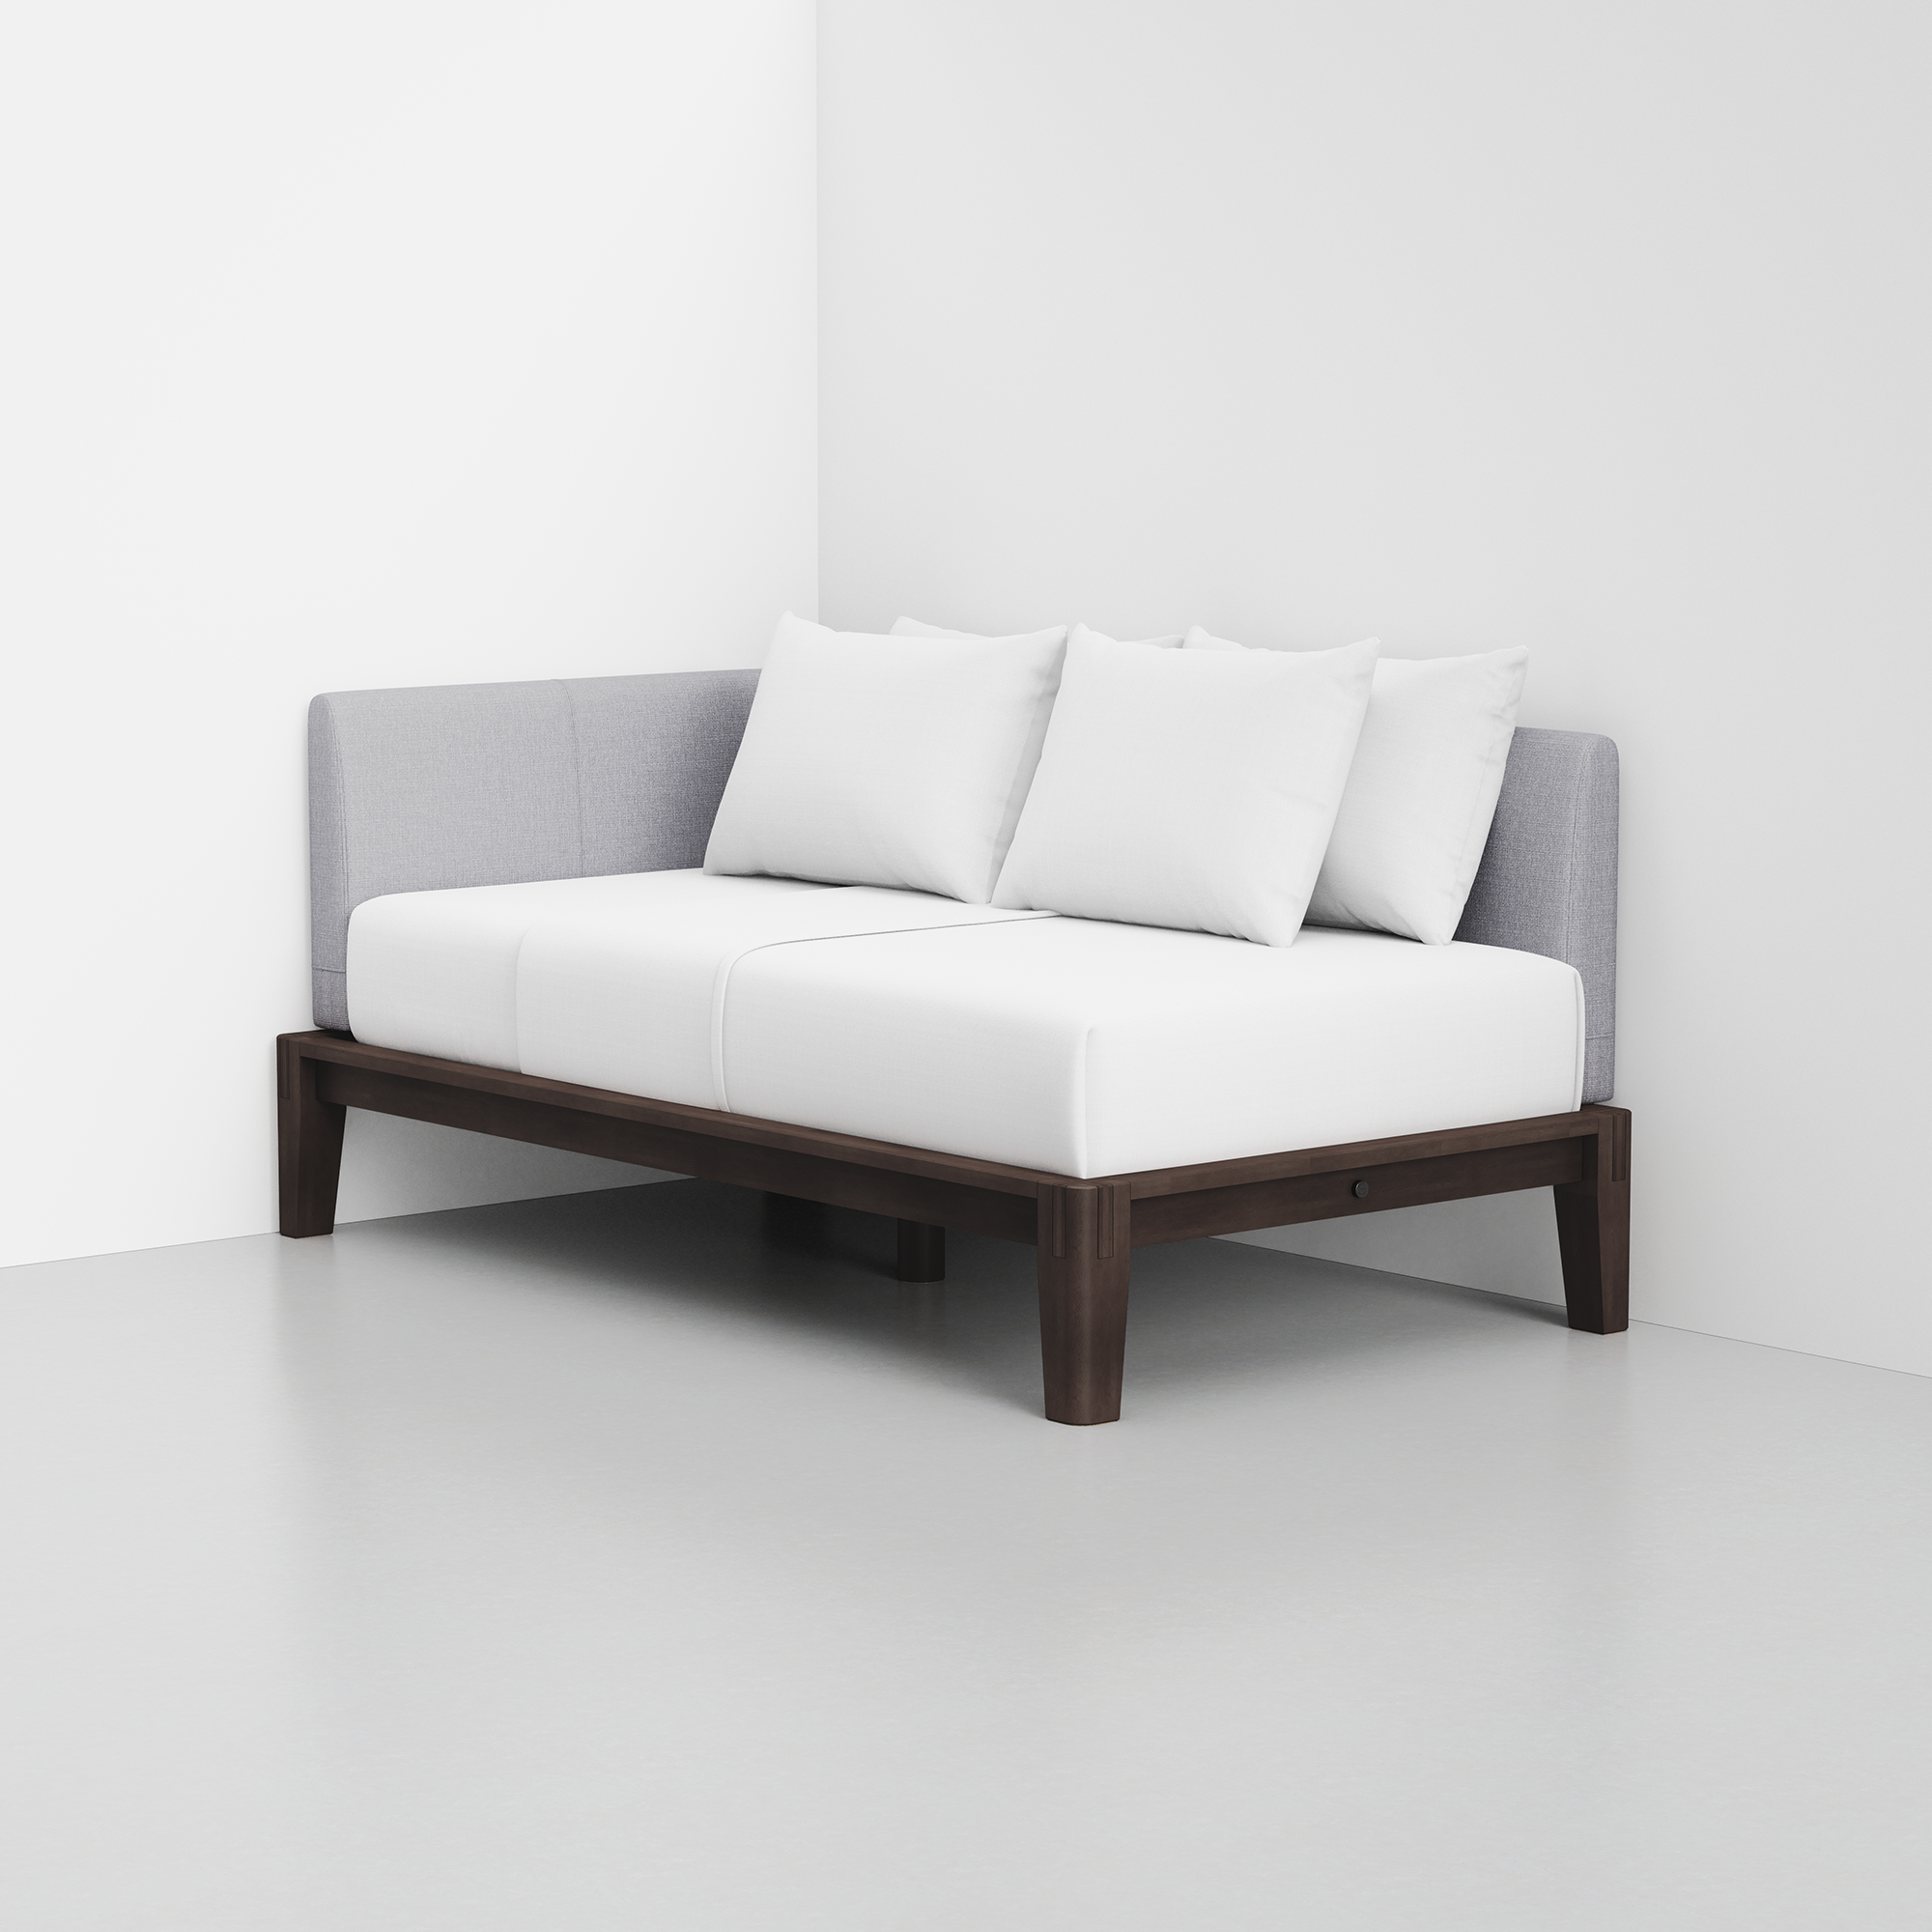 PDP Image: The Daybed (Espresso / Fog Grey) - Rendering - Pillows Stacked